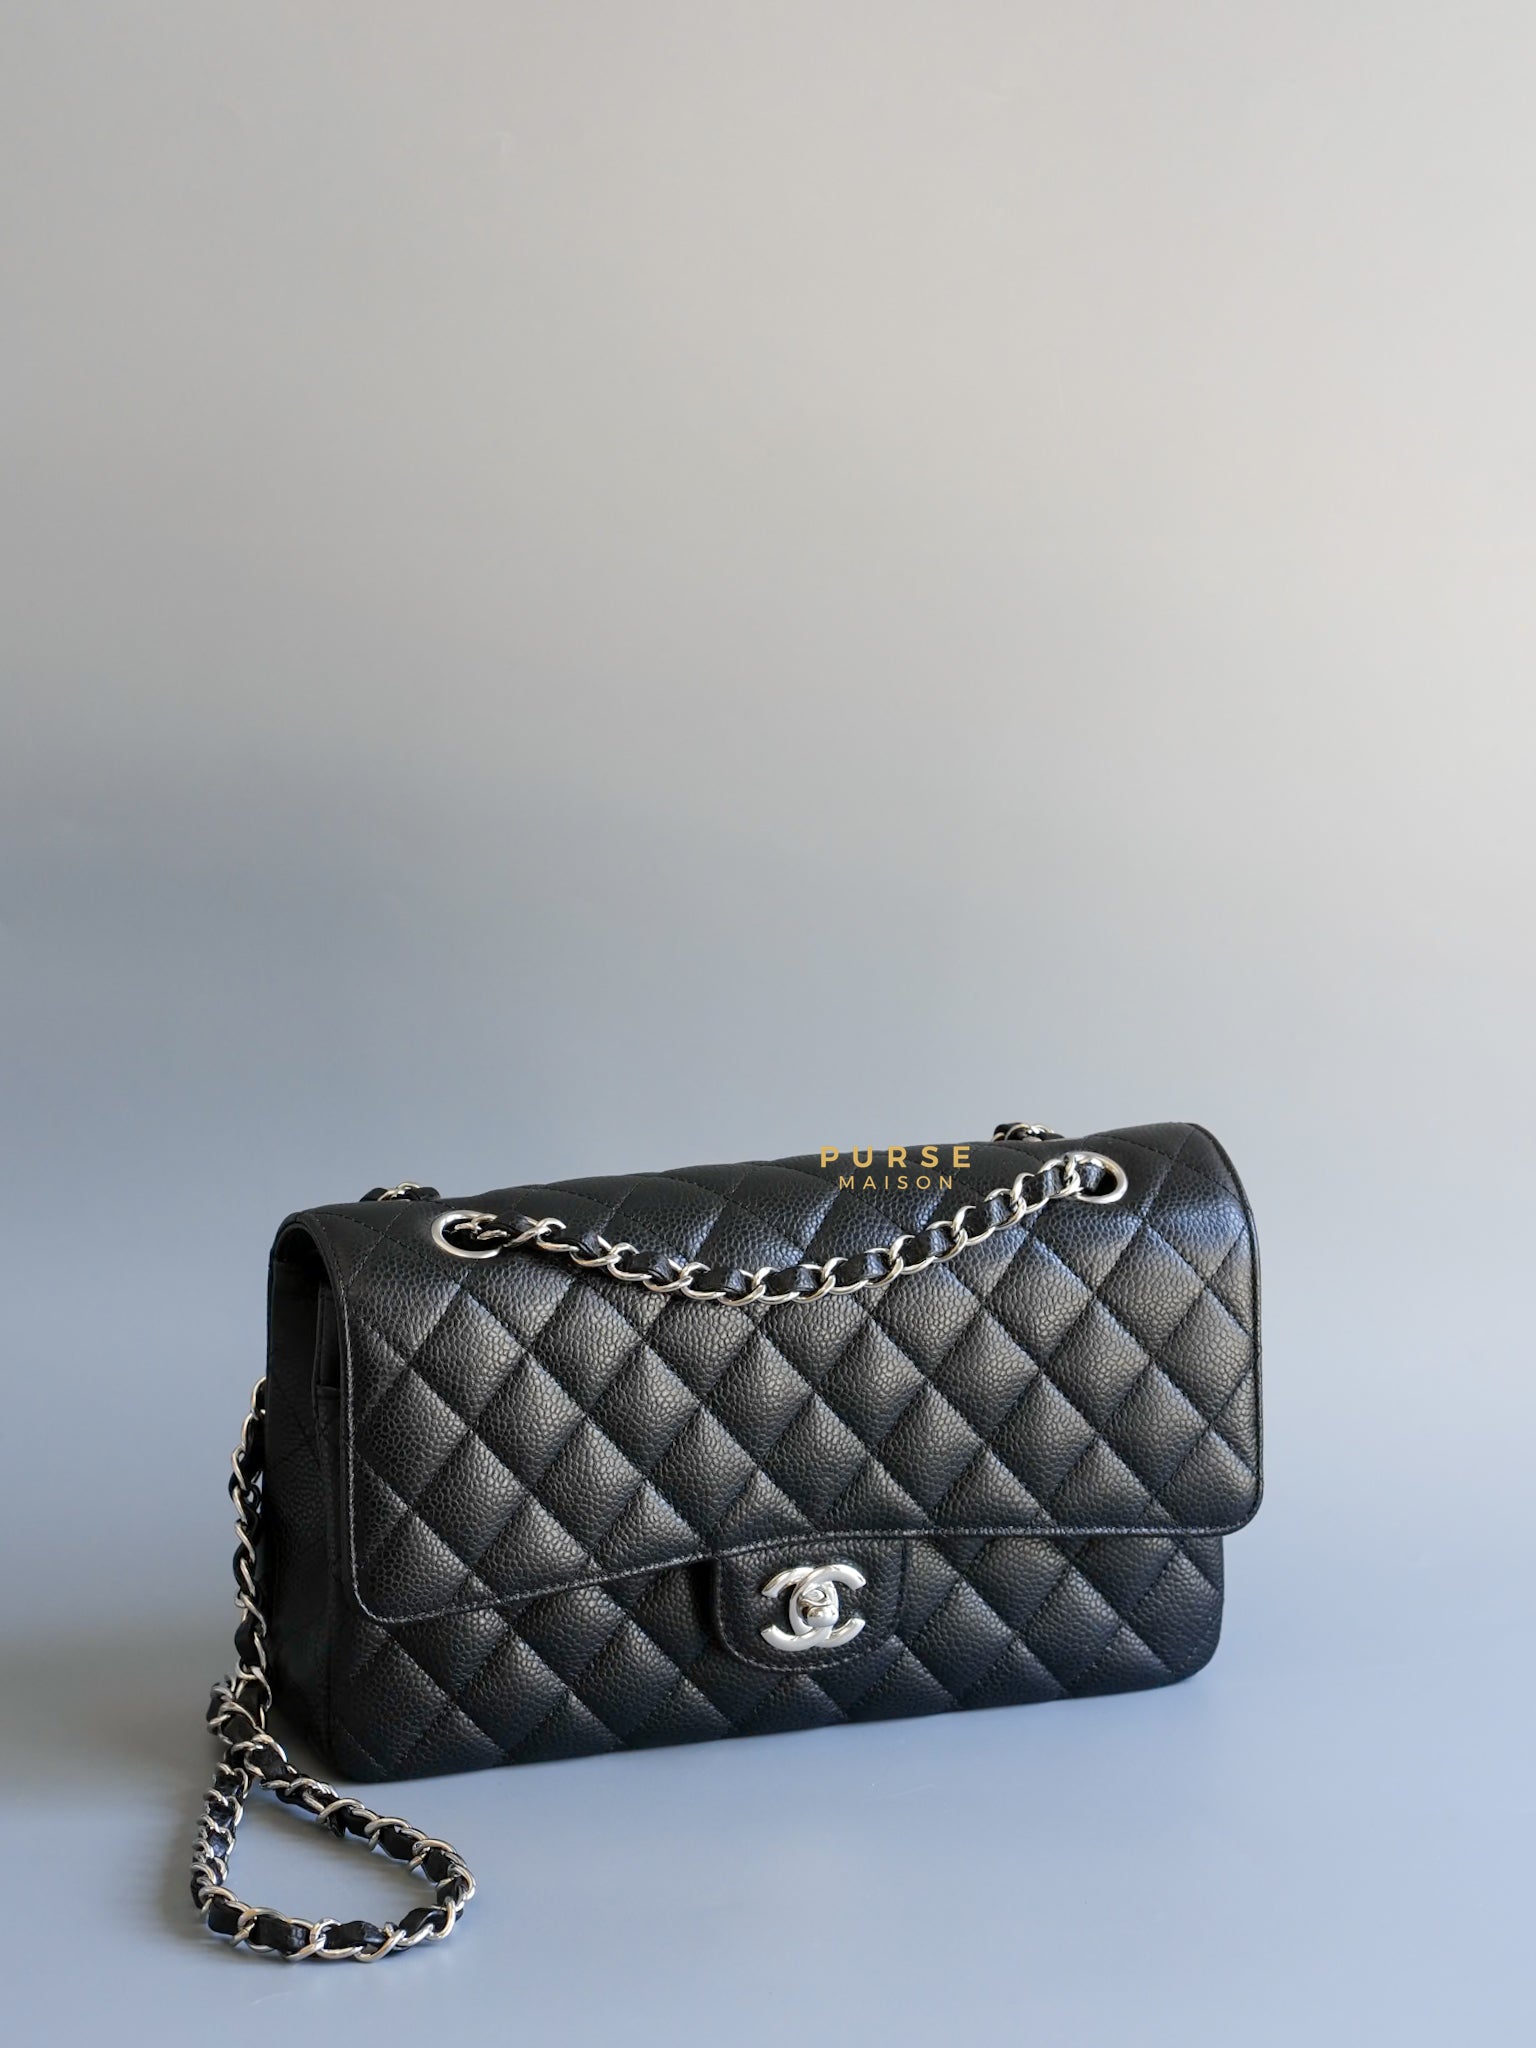 Classic Double Flap Medium in Black Caviar Leather and Silver Hardware (Microchip) | Purse Maison Luxury Bags Shop